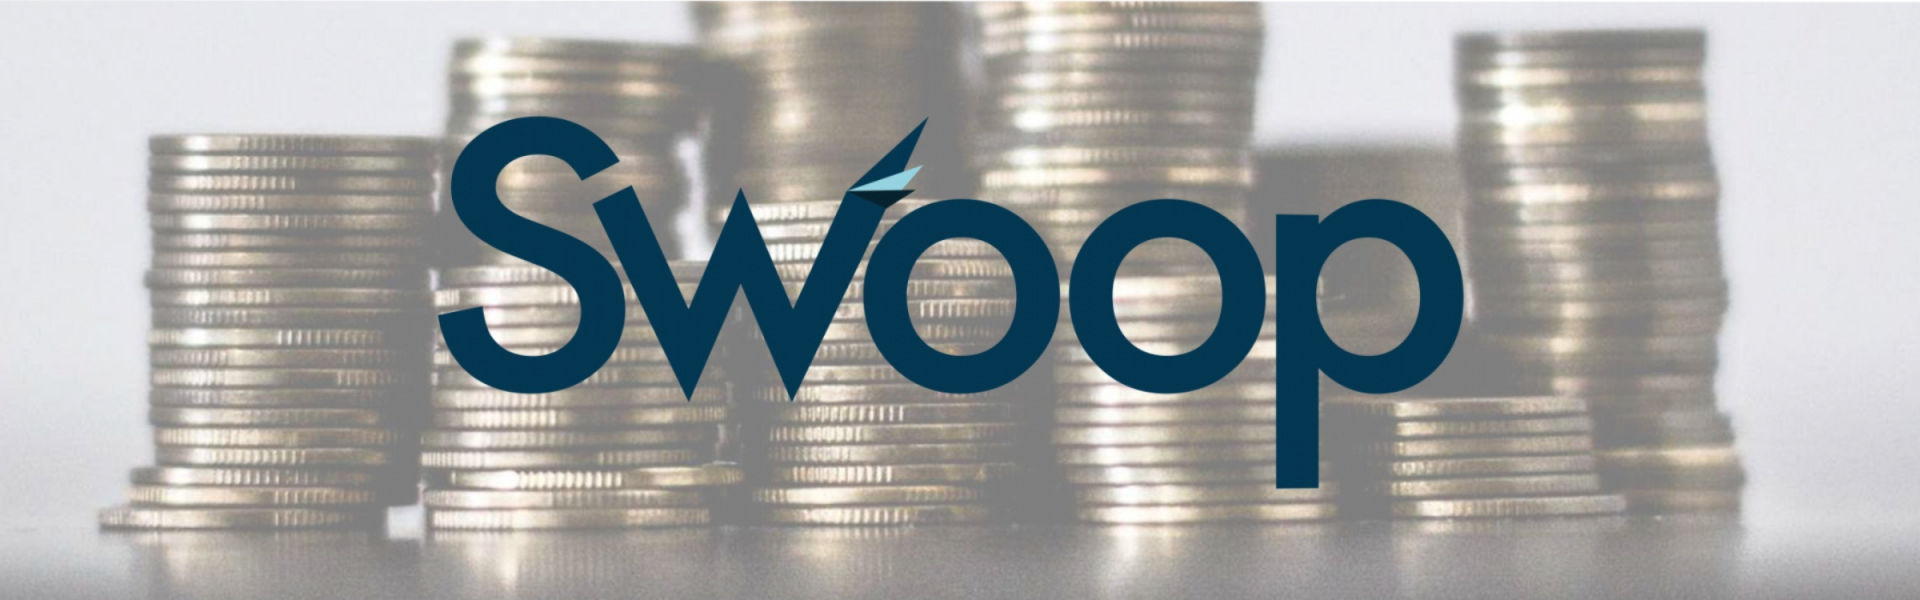 Swoop is the one-stop money shop for your business